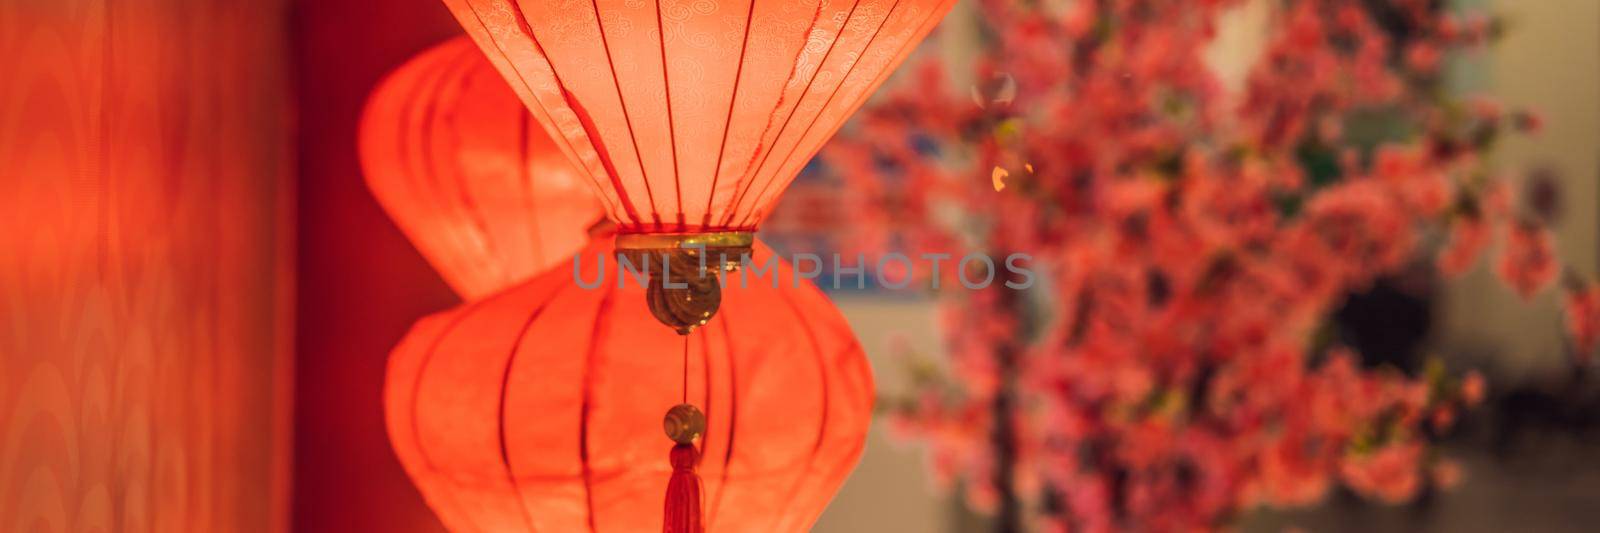 Chinese red lanterns for the Chinese New Year BANNER, LONG FORMAT by galitskaya